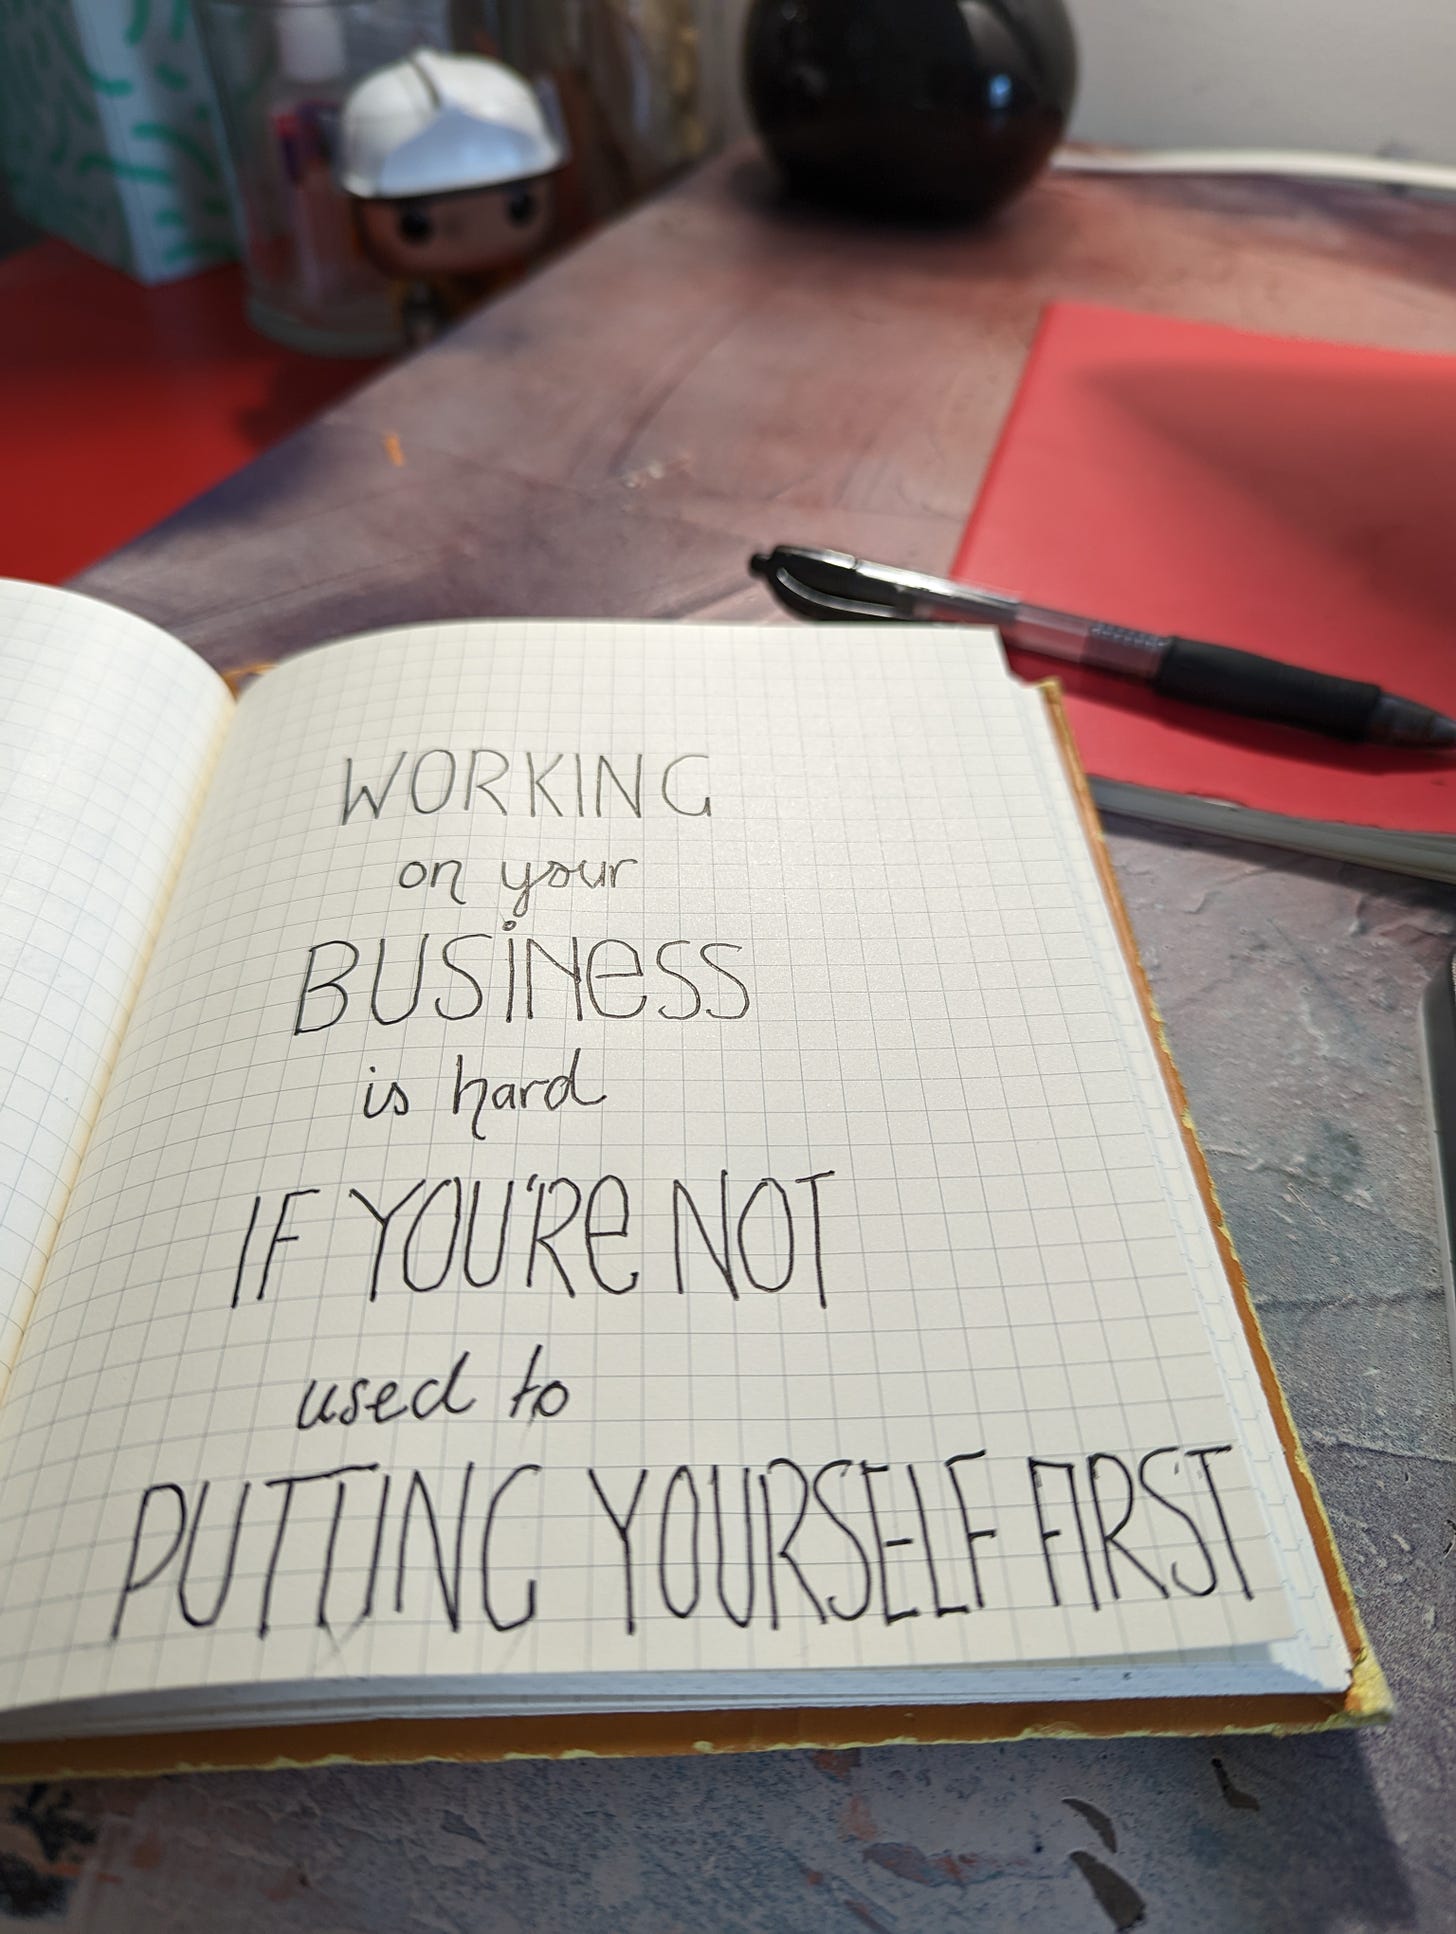 grid book reads - working on your business is hard if you’re not used to putting yourself first.